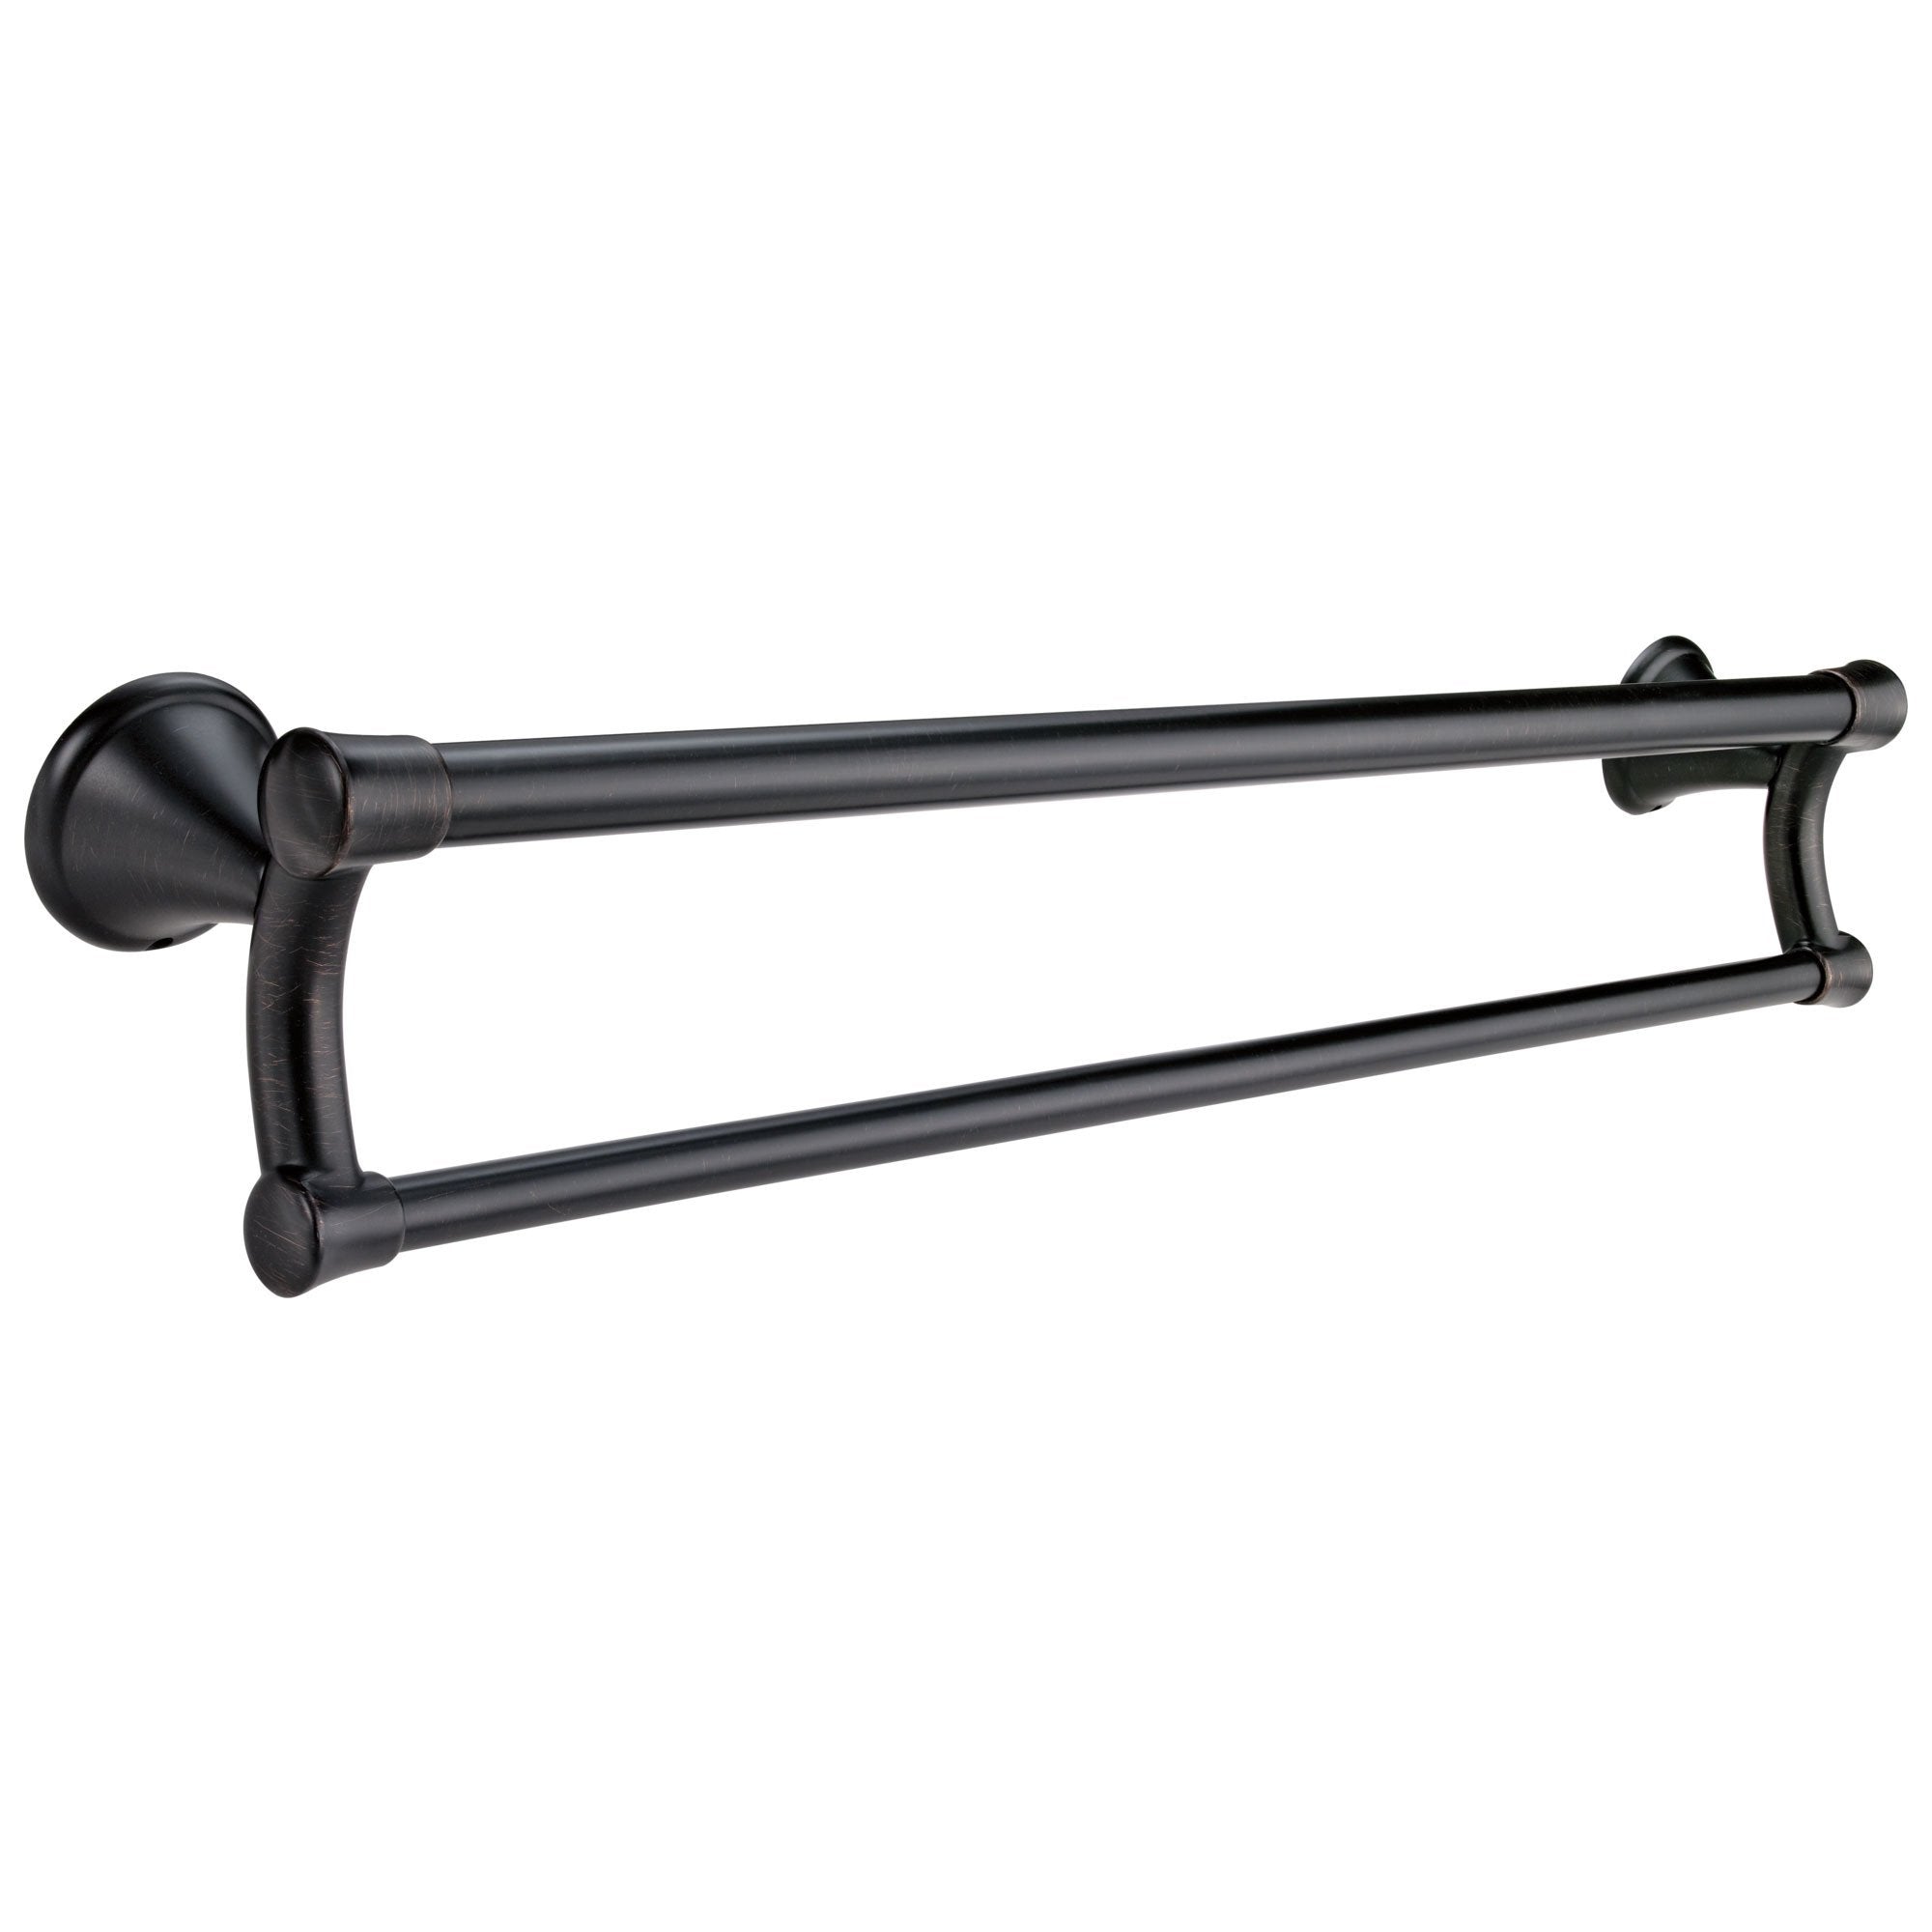 Delta Bath Safety Collection Venetian Bronze Finish Transitional Style 24" Towel Bar with Assist Grab Bar D41419RB